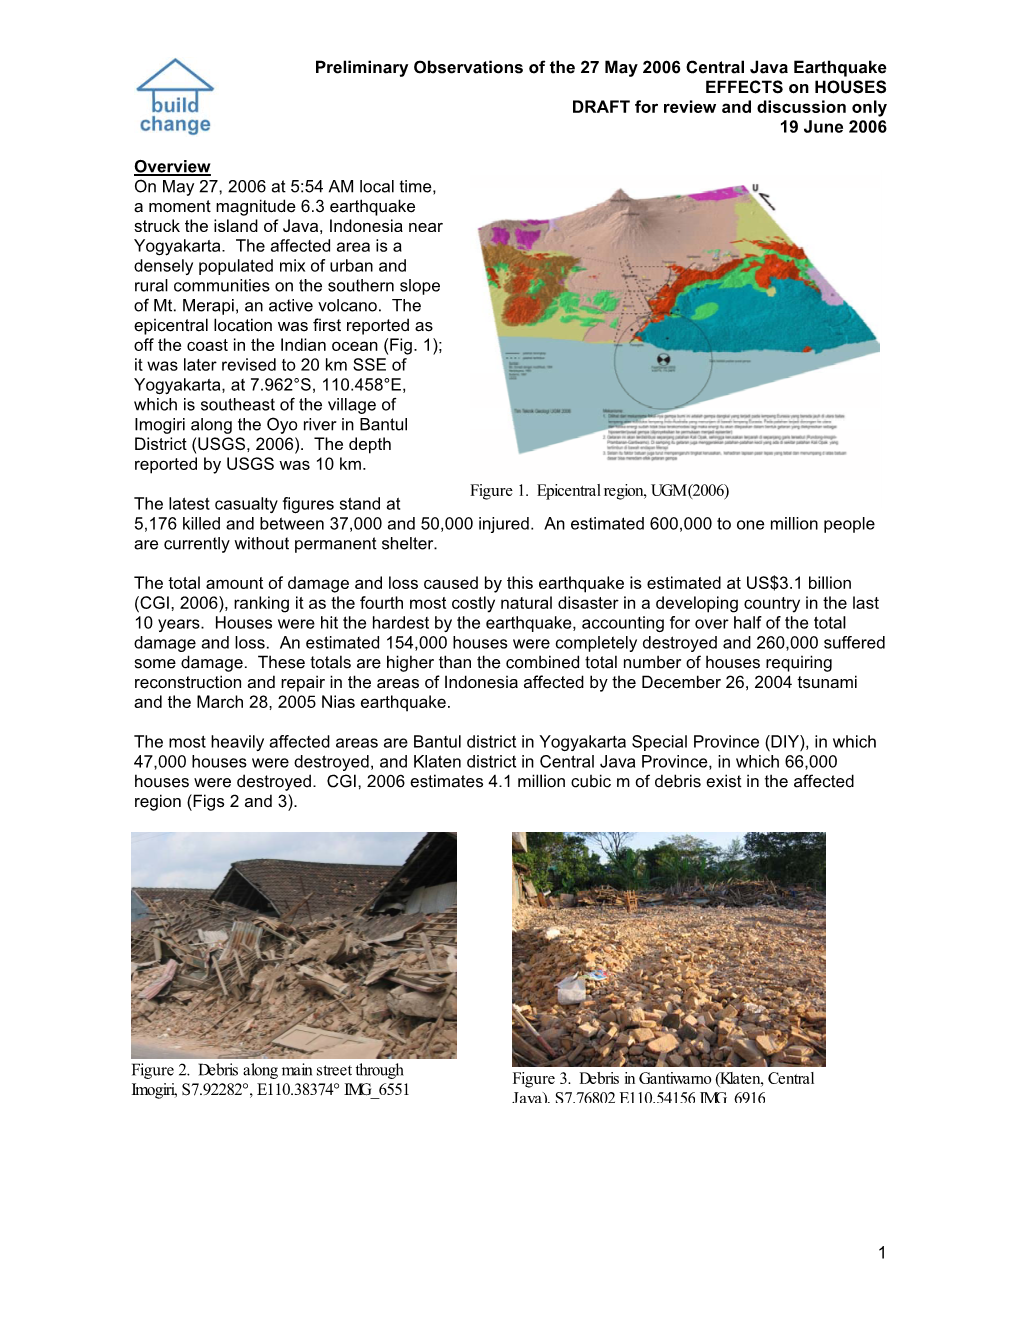 Preliminary Observations of the 27 May 2006 Central Java Earthquake EFFECTS on HOUSES DRAFT for Review and Discussion Only 19 June 2006